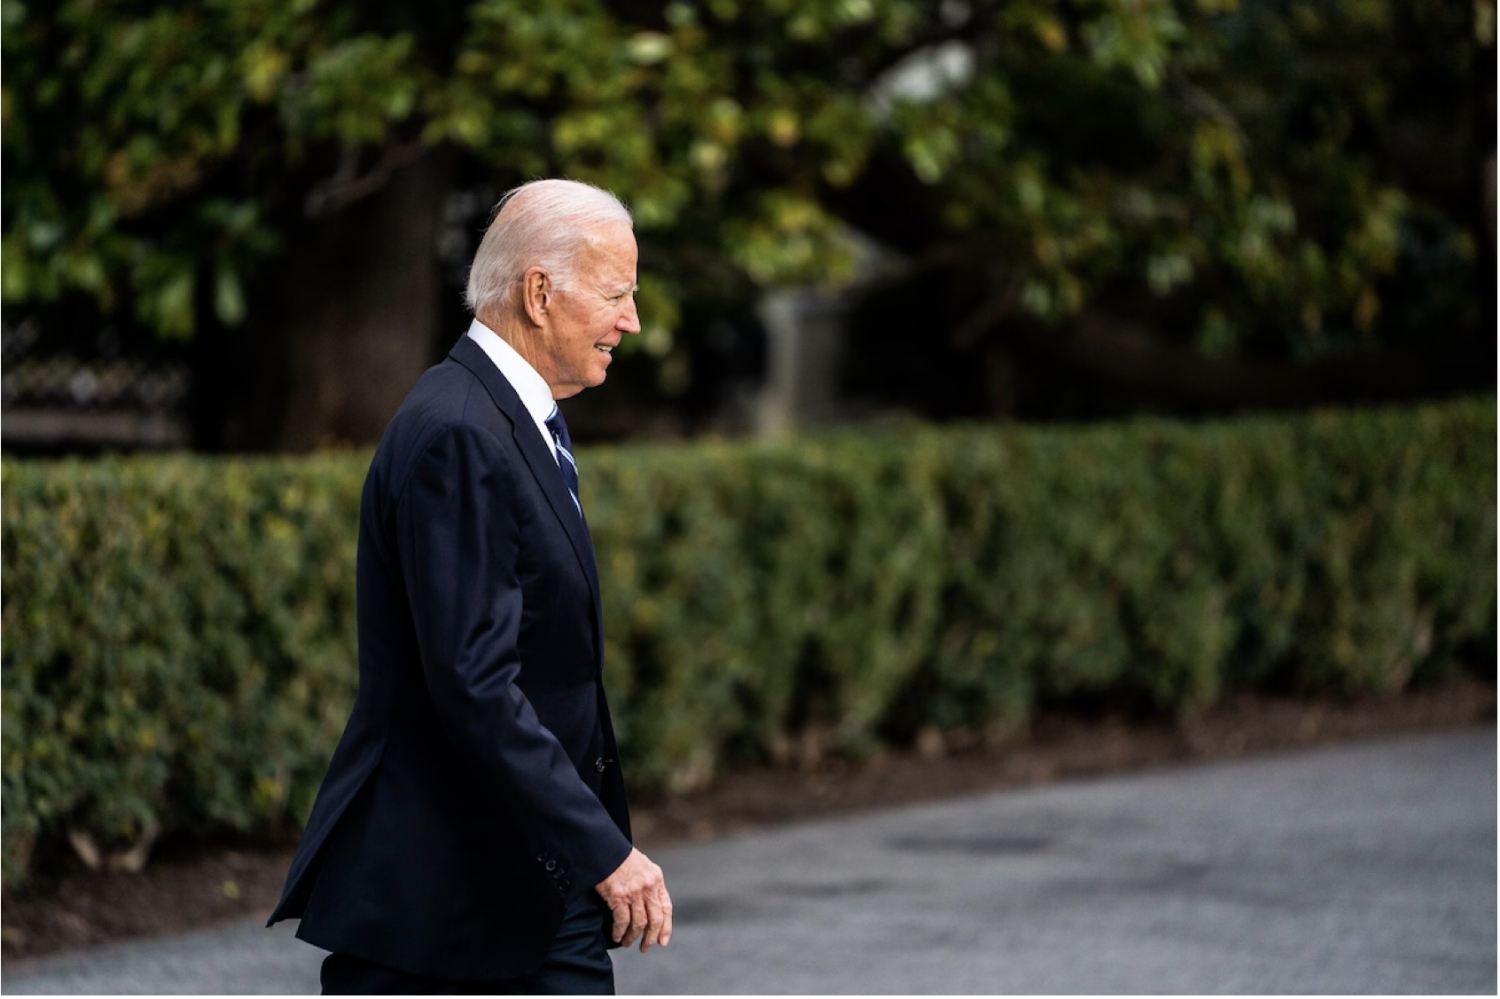 The Biden, Trump cases 3:22  (Video: Blair Guild/The Post; photo: Demetrius Freeman/The Post) More classified documents found at Biden’s Wilmington home, White House says